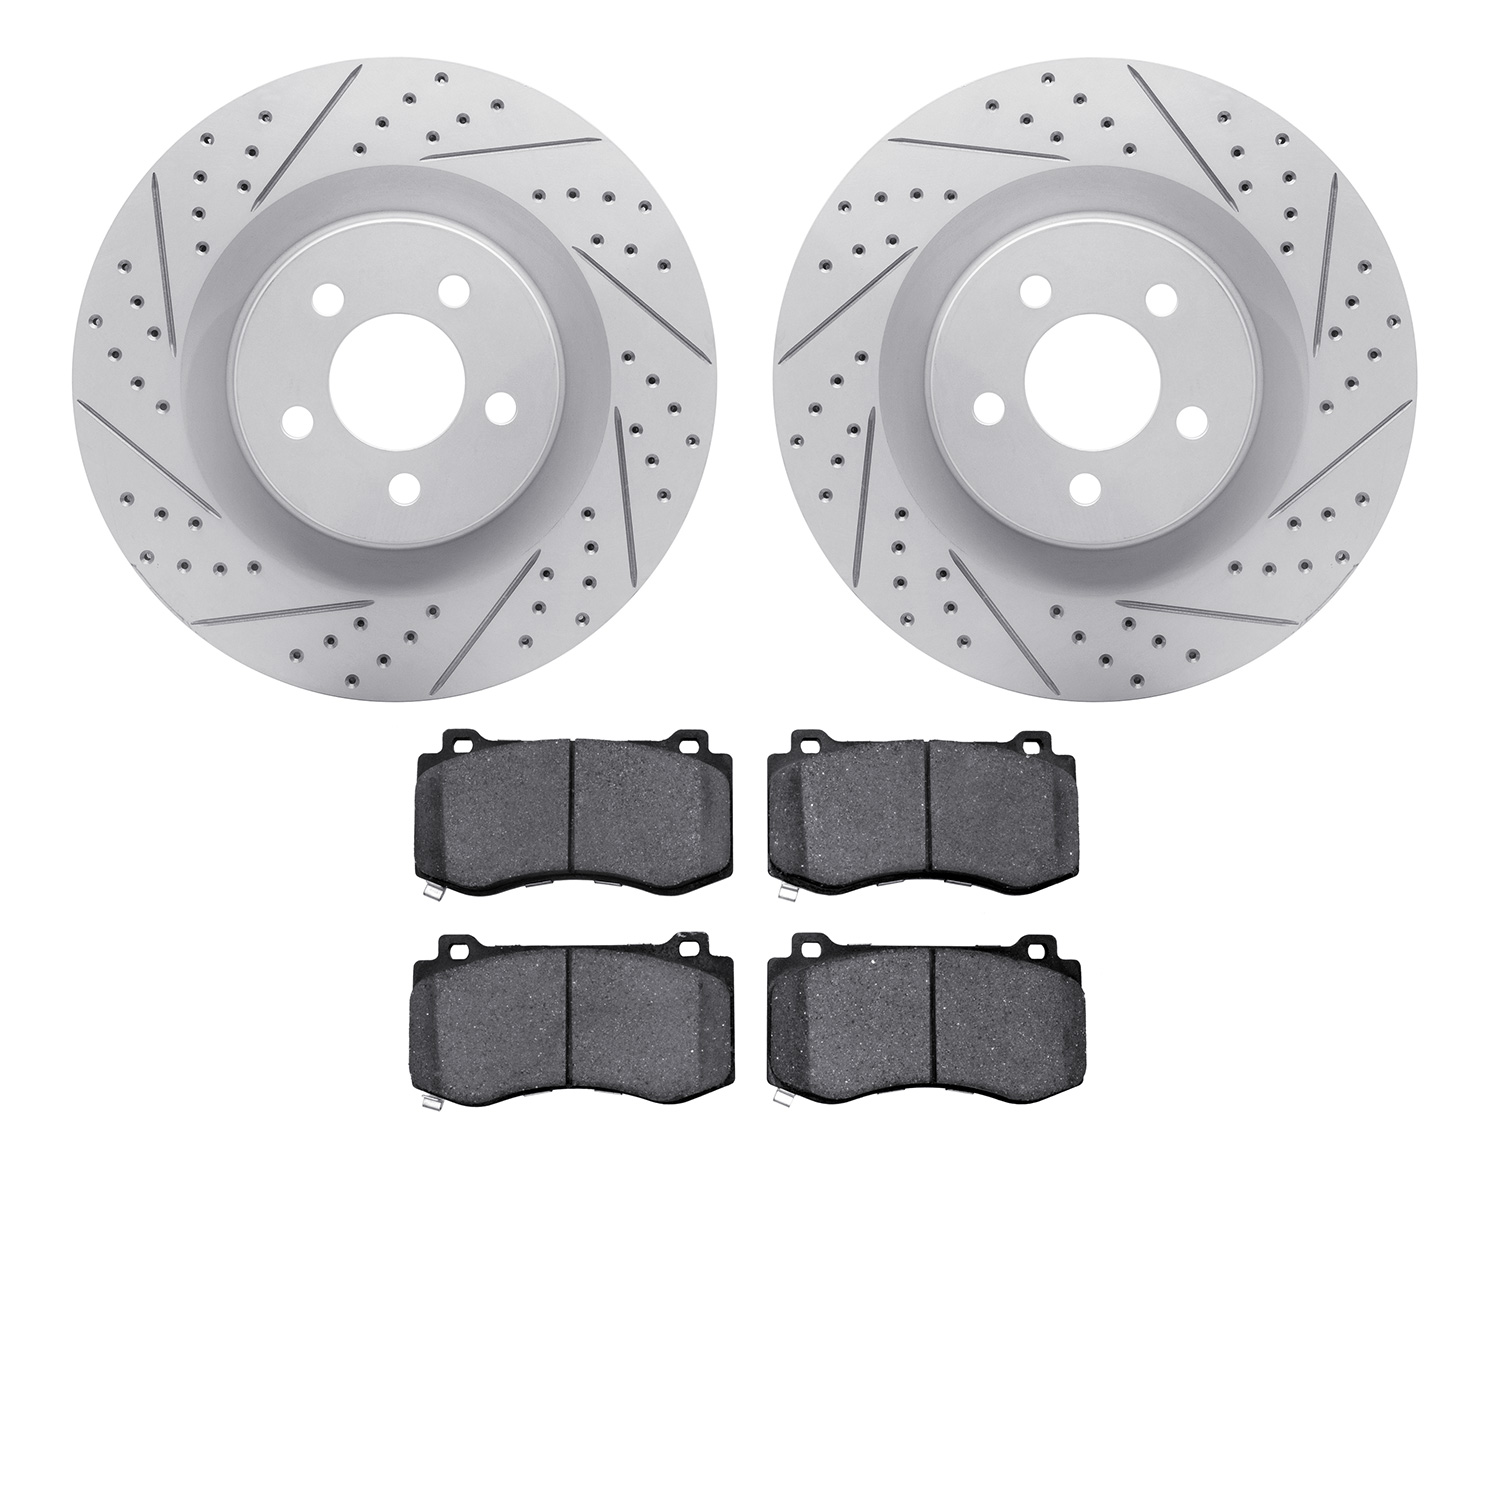 2502-39016 Geoperformance Drilled/Slotted Rotors w/5000 Advanced Brake Pads Kit, Fits Select Mopar, Position: Front